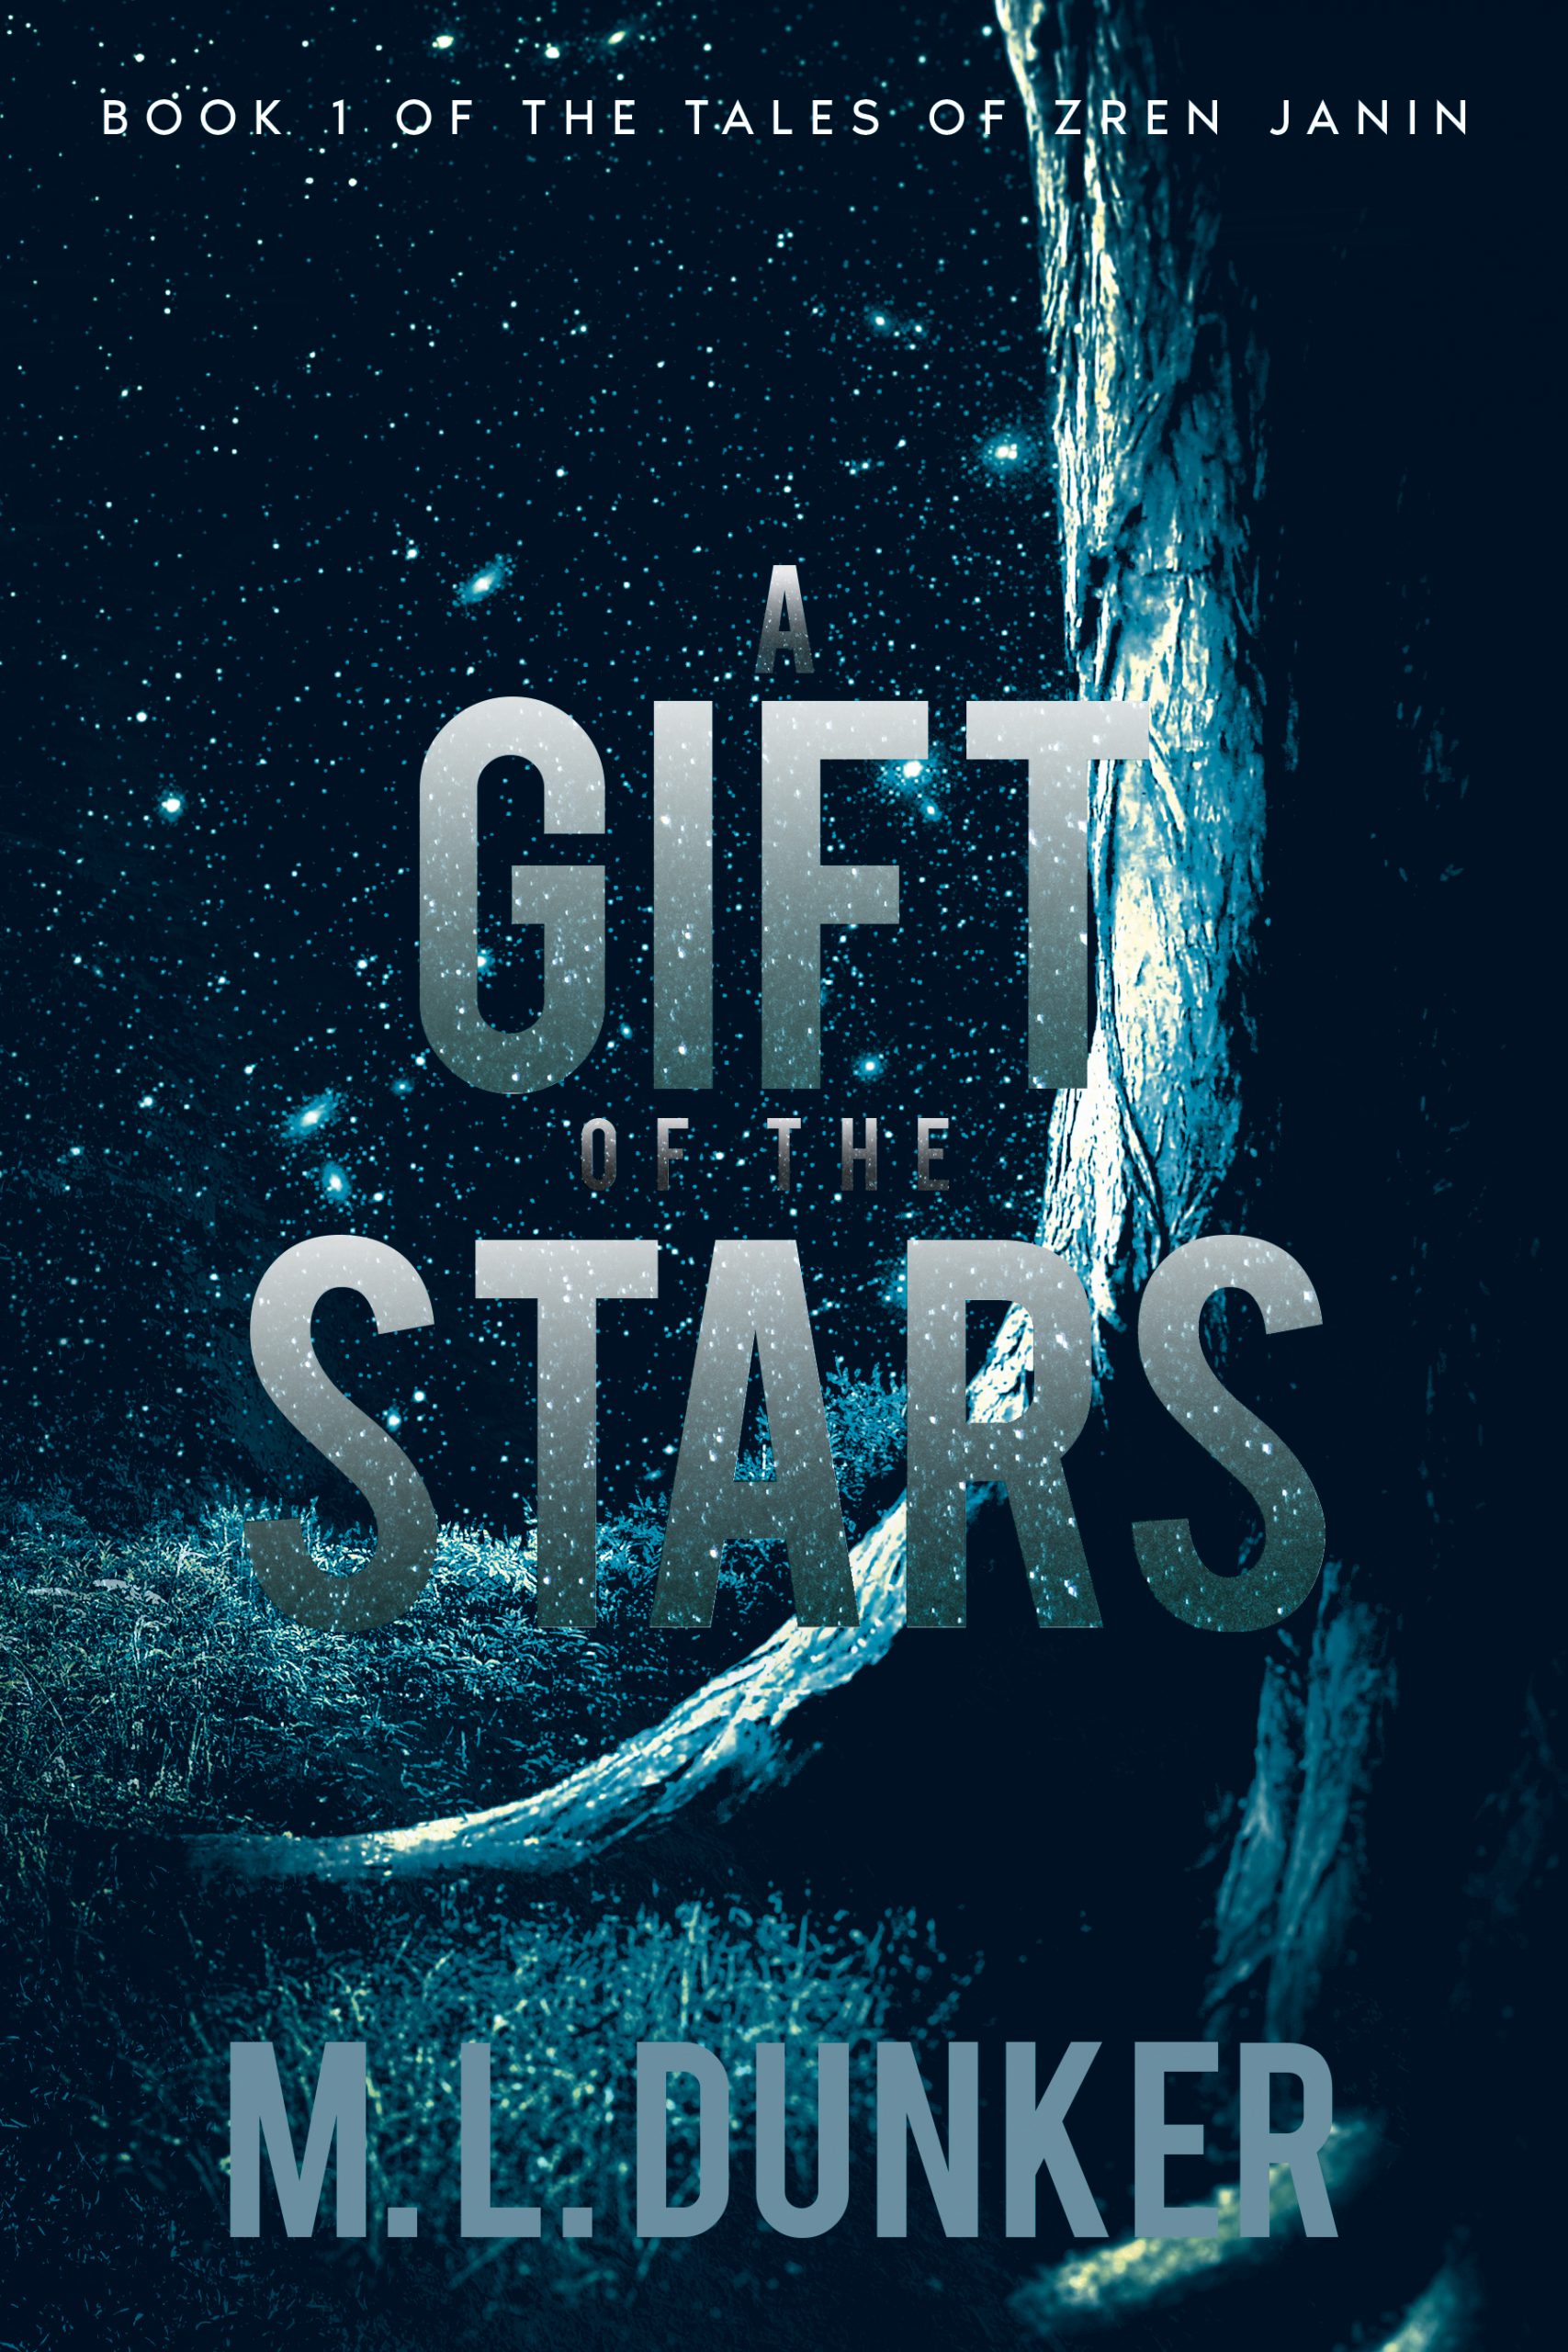 Book 1: A Gift of the Stars